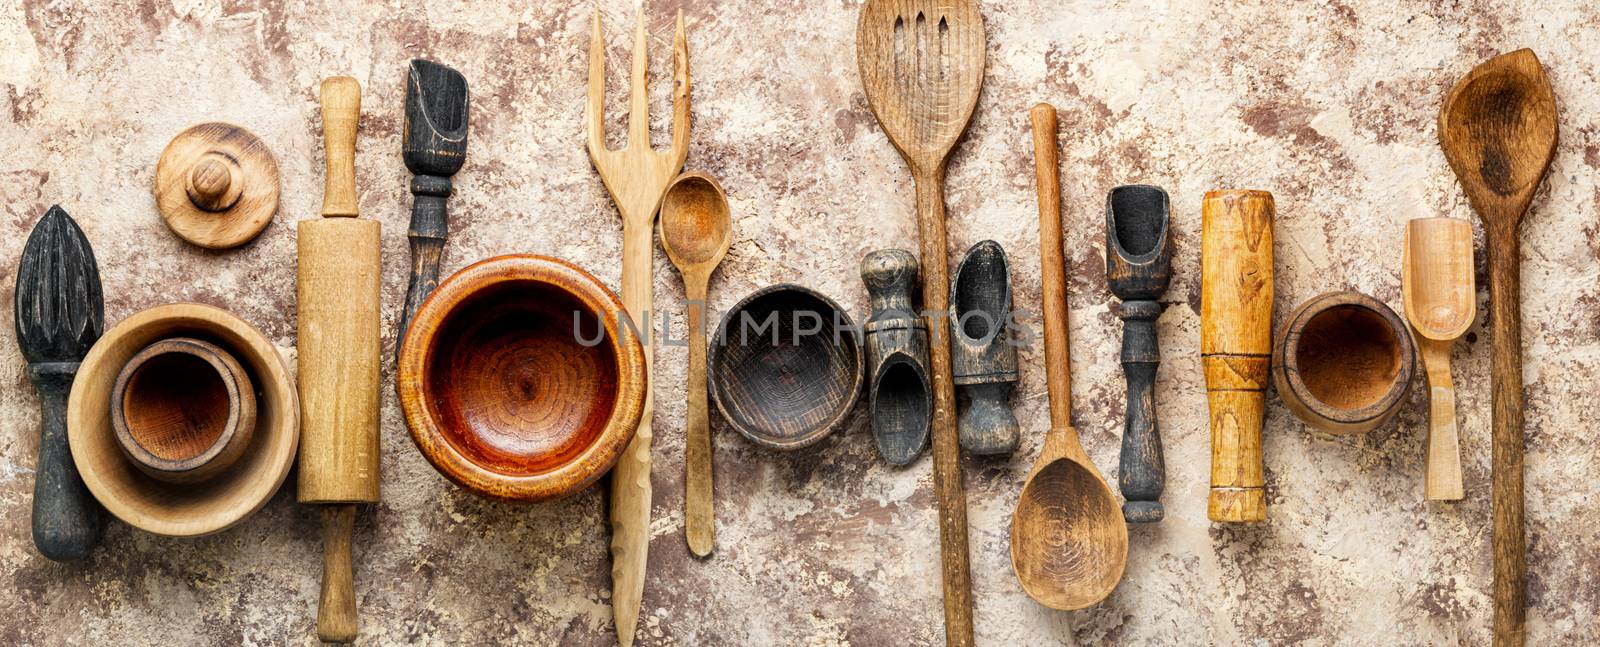 Concept of wooden rustic kitchenware utensils set on old background.Cutlery set